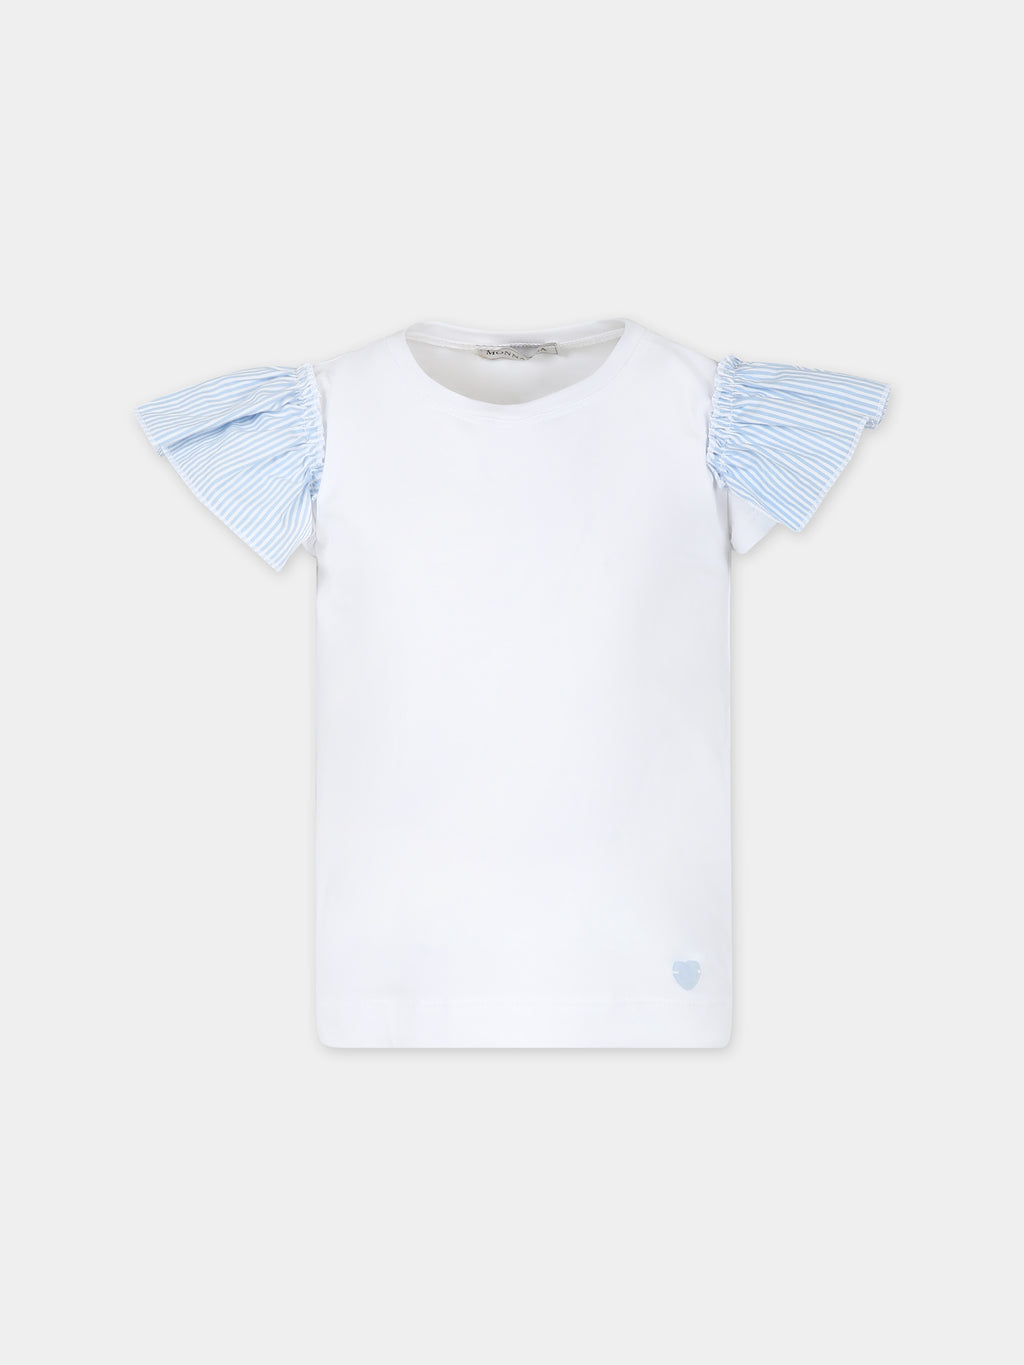 White t-shirt for girl with light blue hearts